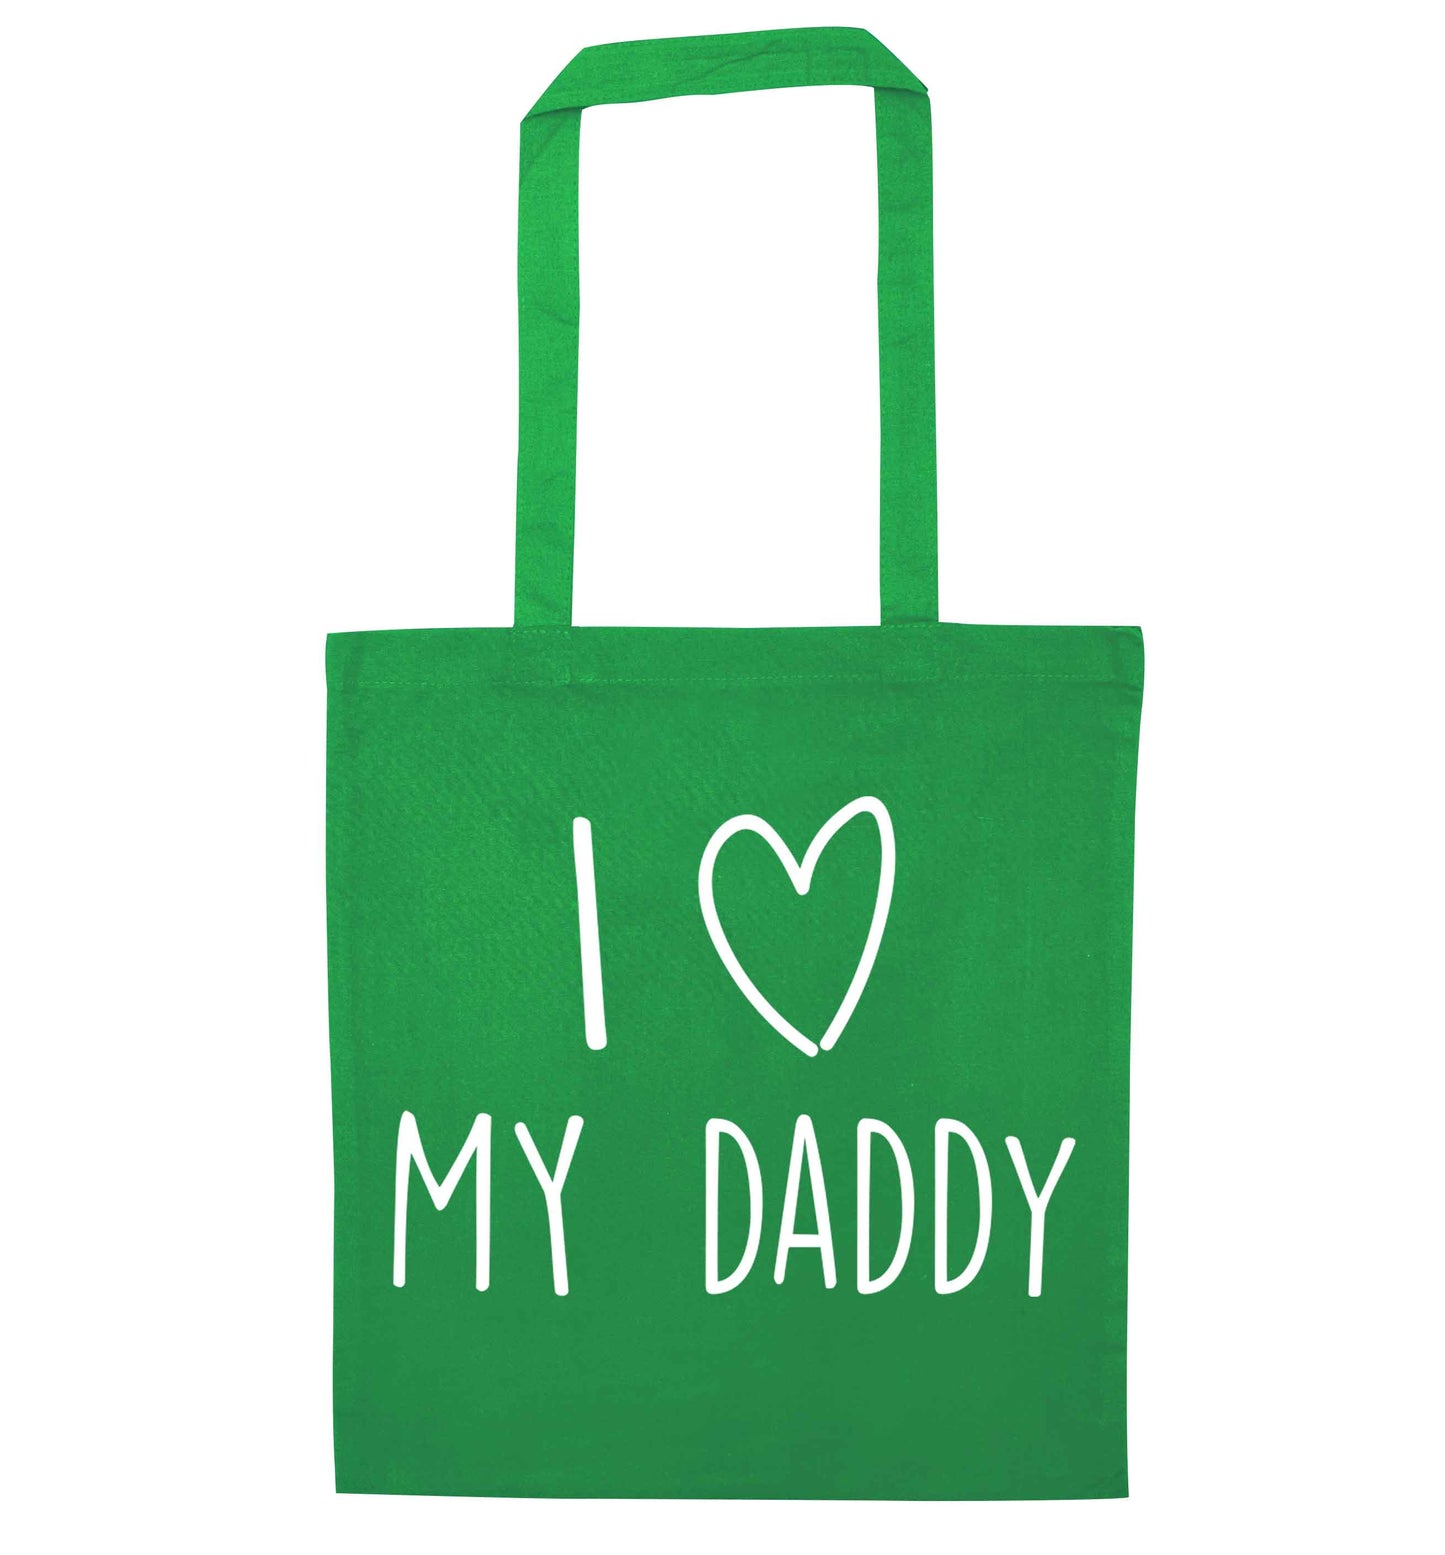 I love my daddy green tote bag